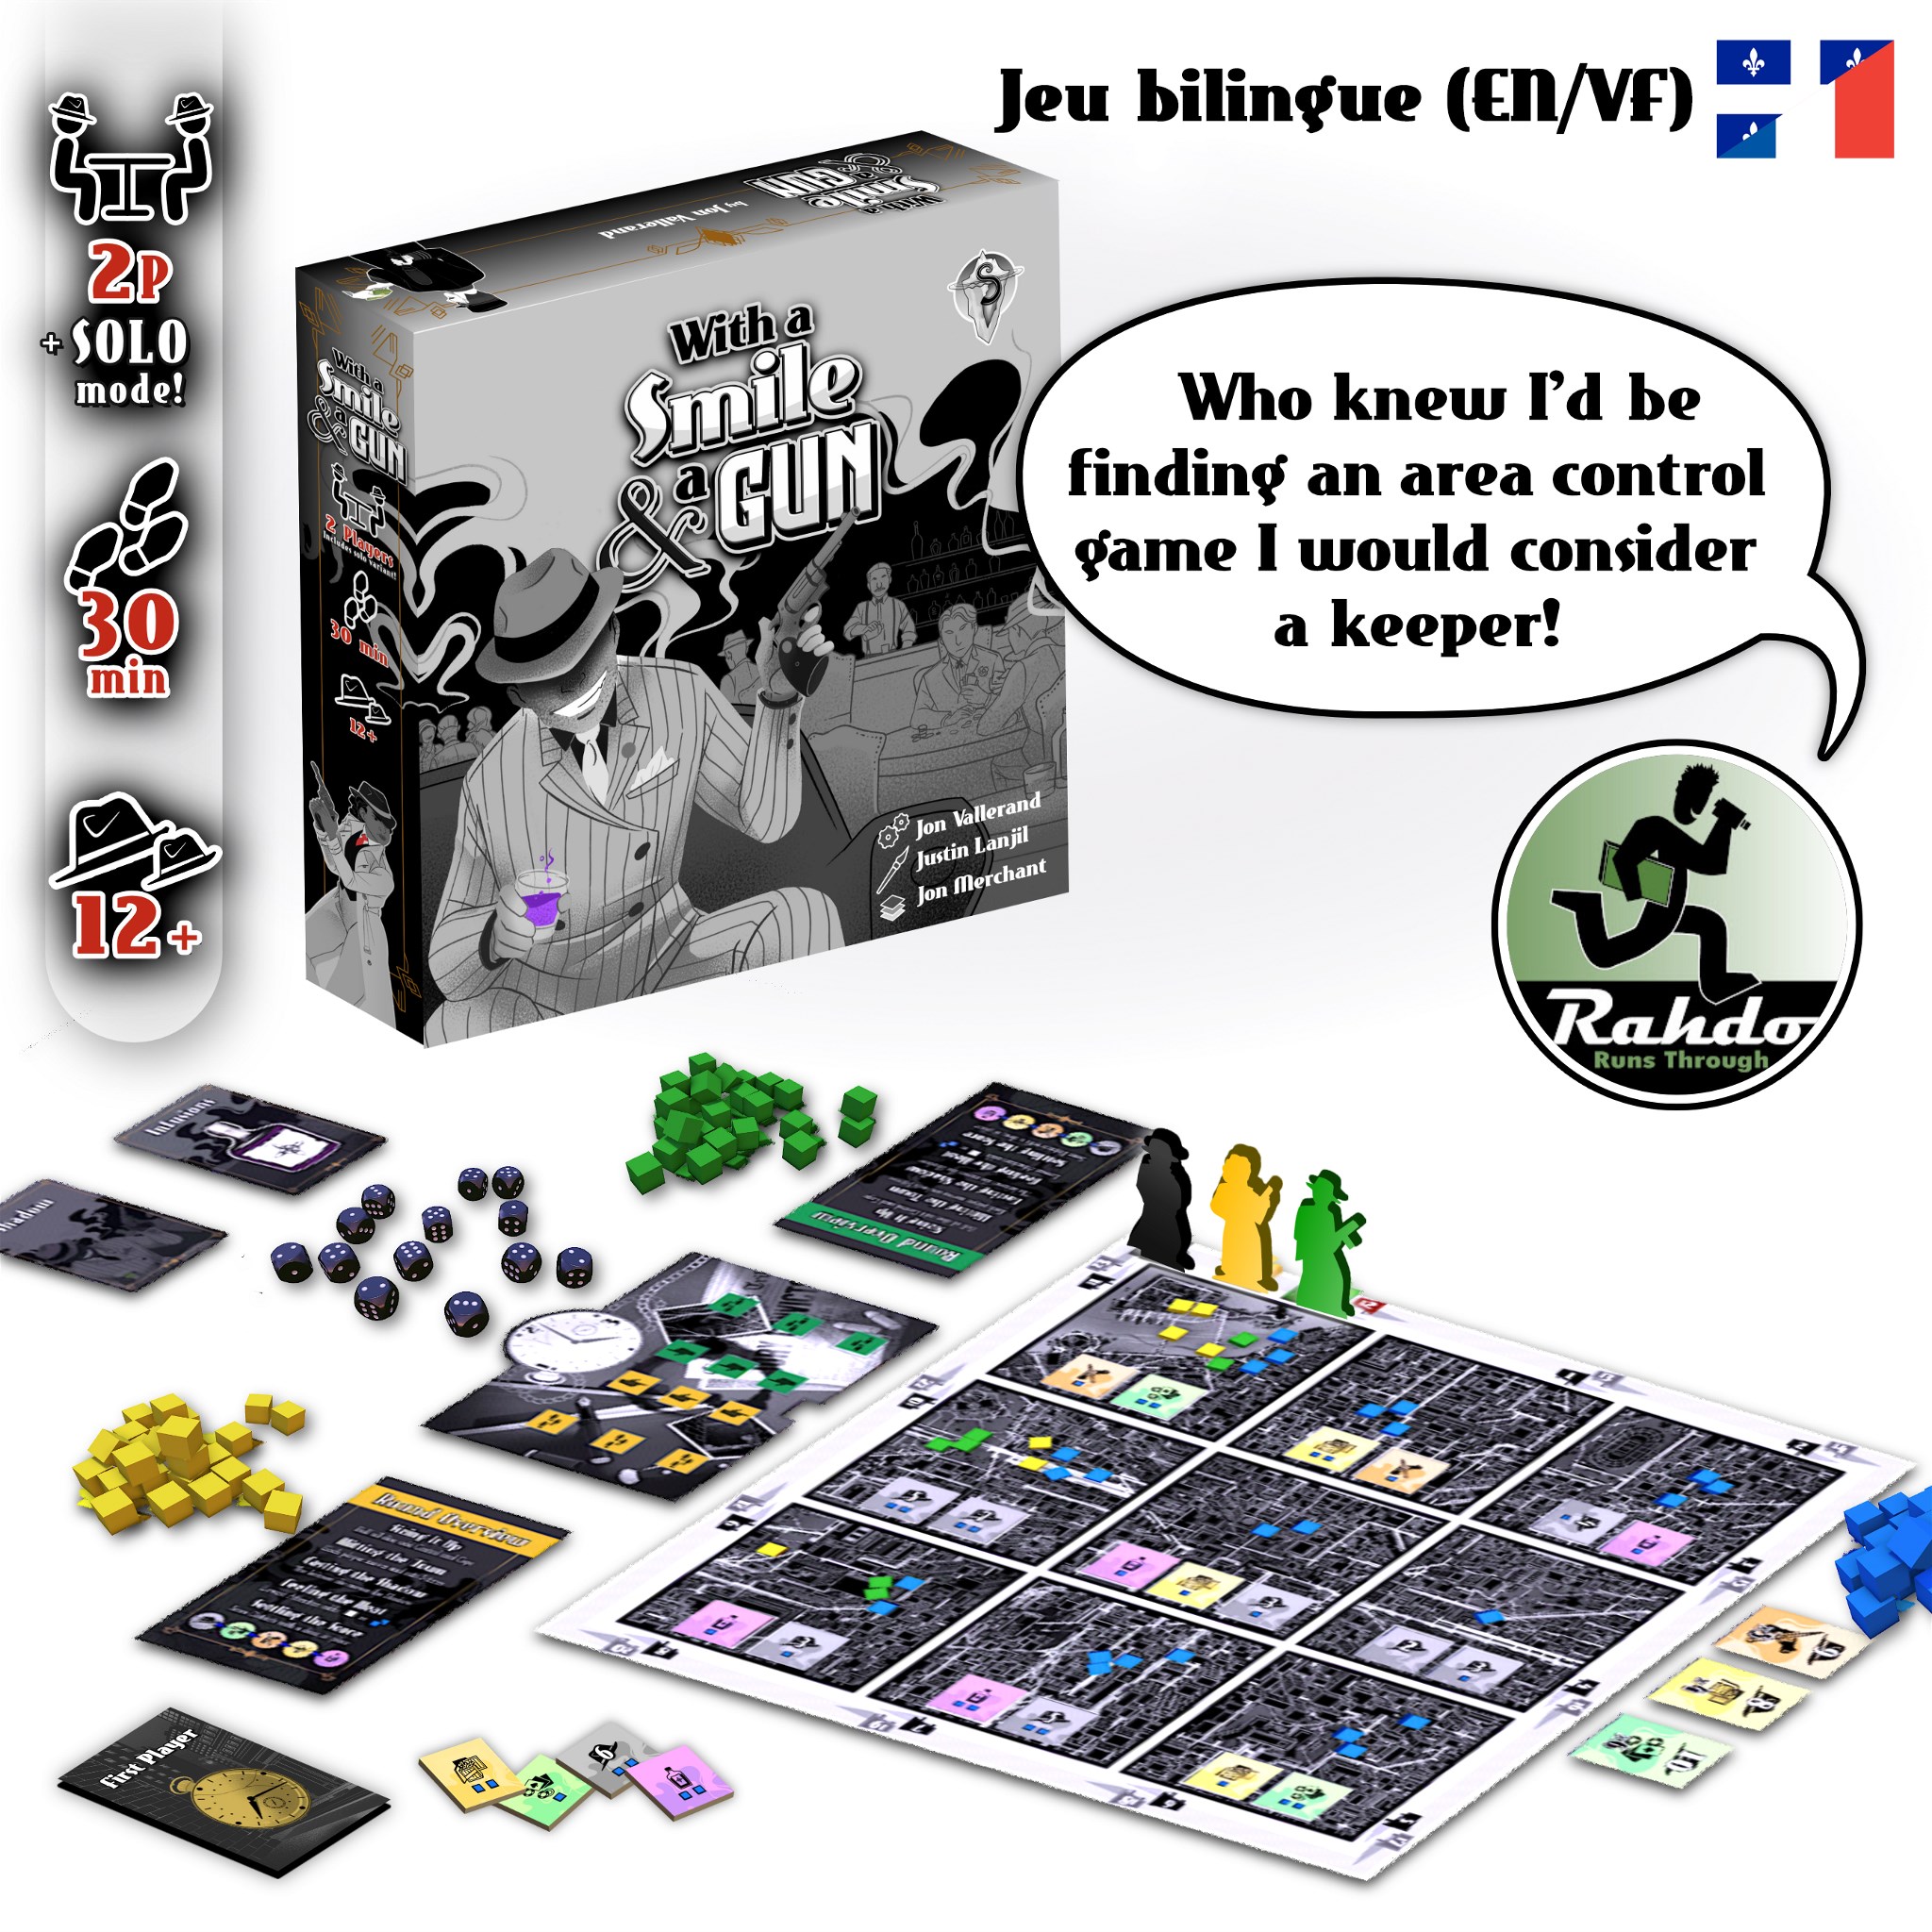 With A Smile and A Gun, a dice drafting game for 2 players by Subsurface Games - With a Smile and a Gun - Physical game